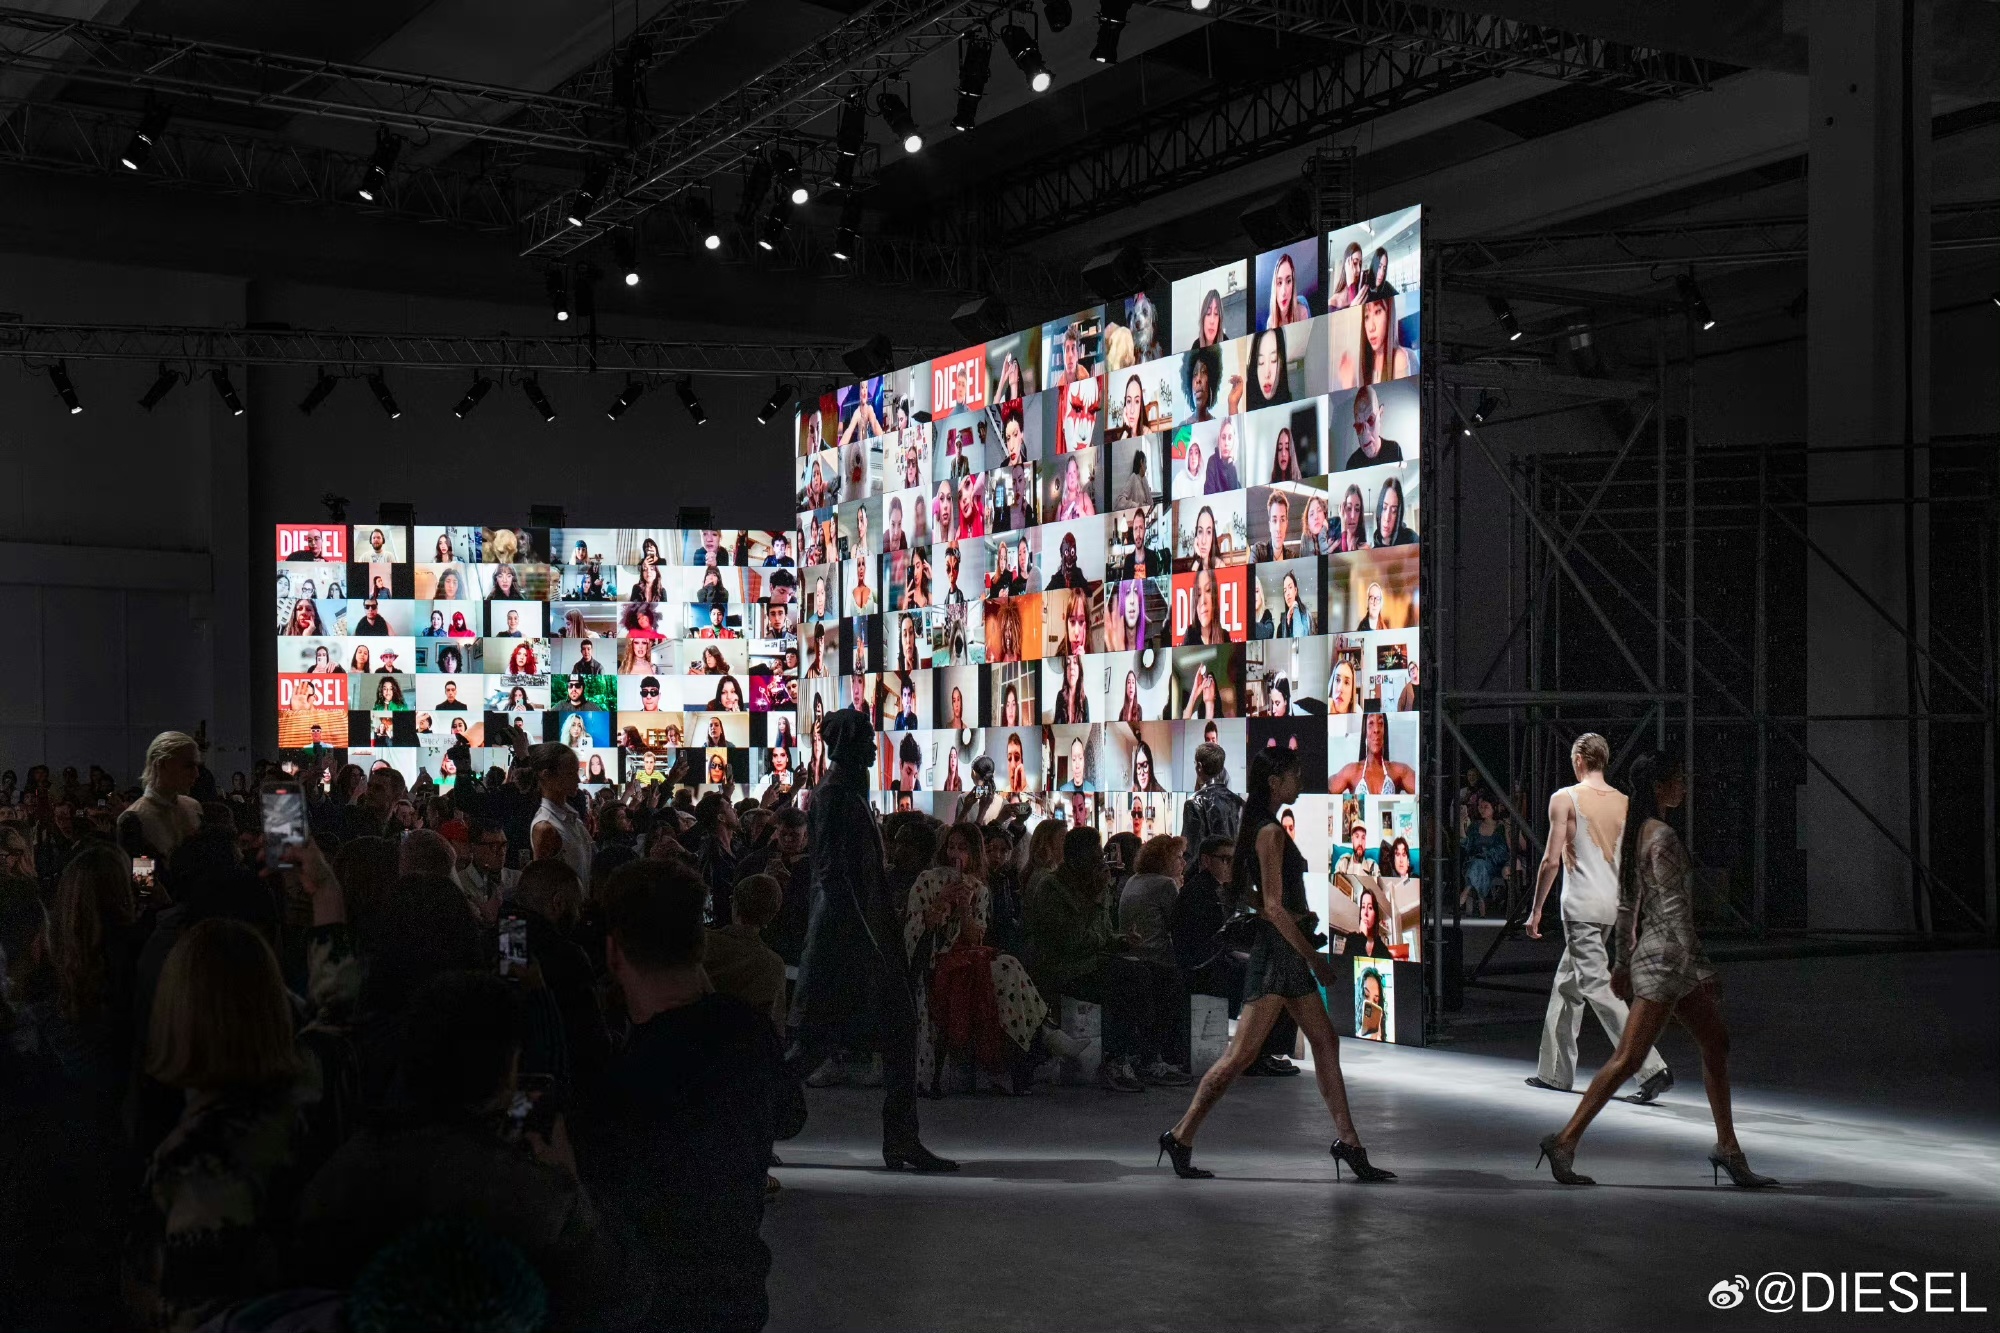 At Diesel's Fall Winter 24/25 show, a noteworthy element was introduced as attendees sat before colossal screens broadcasting a Zoom call featuring over 1,000 meeting participants. Photo: Diesel